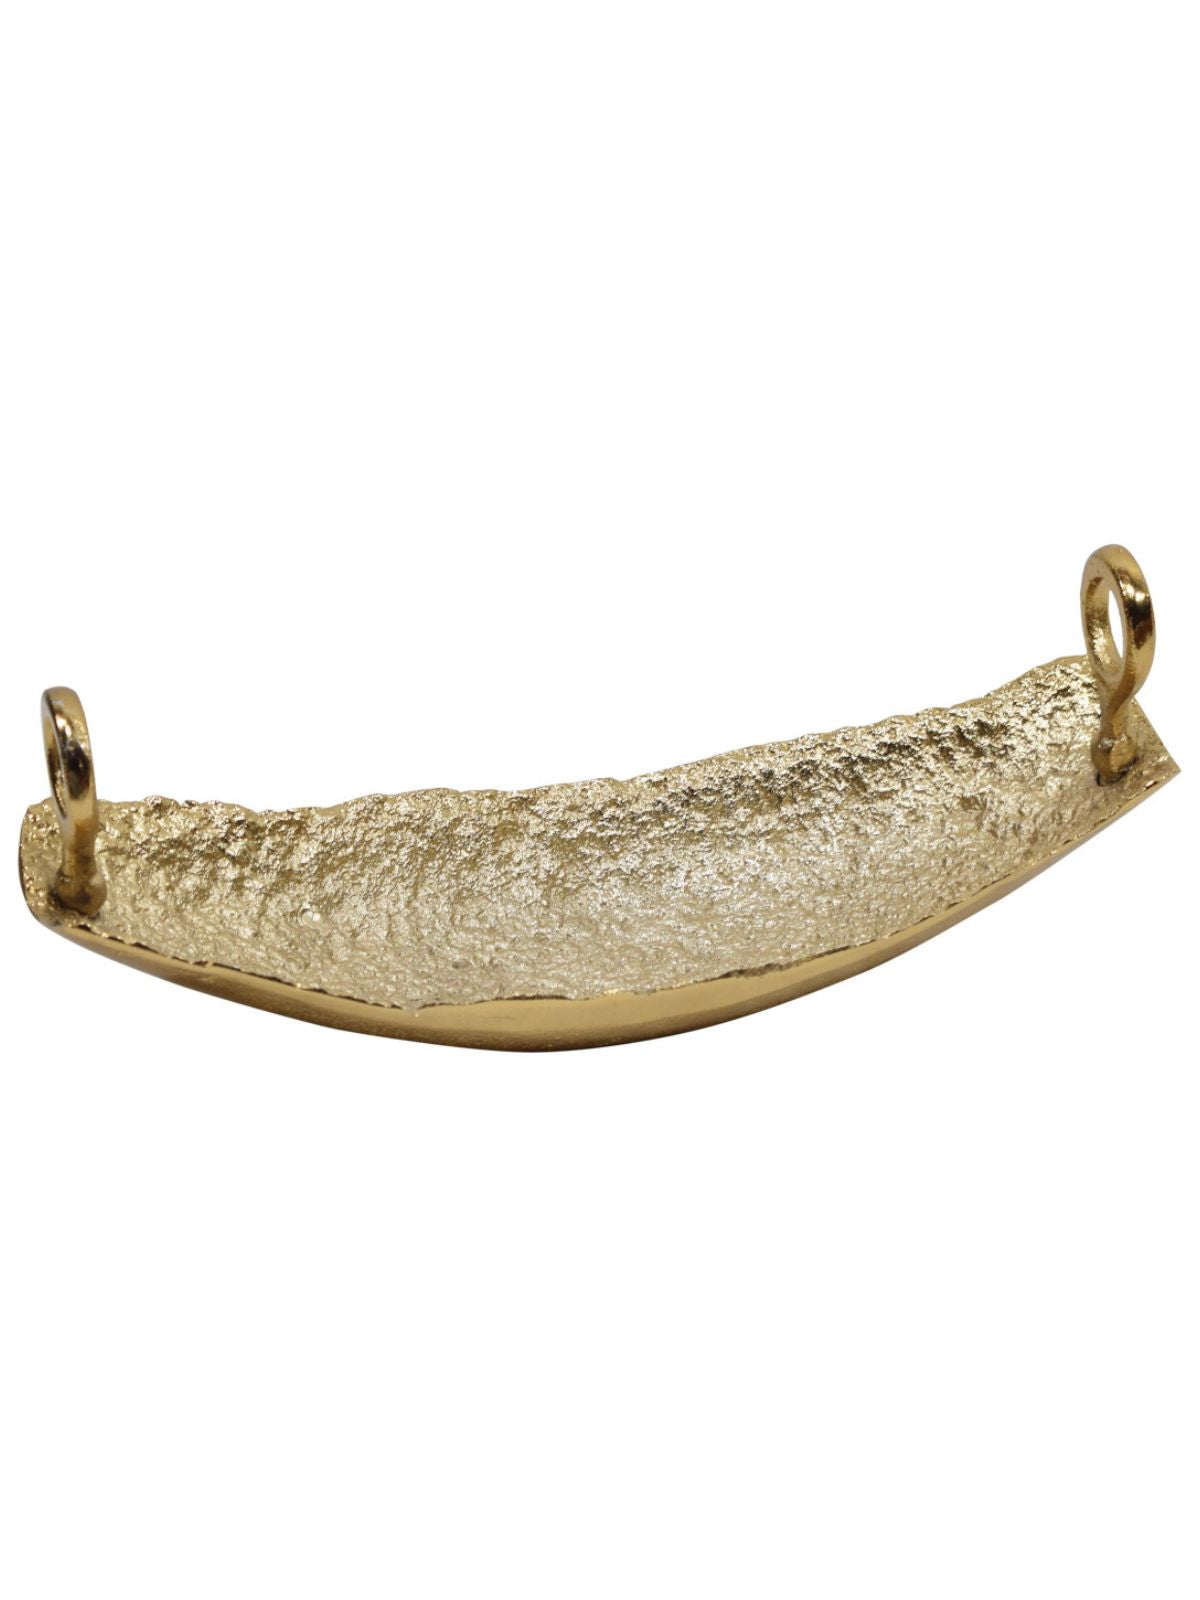 Place your food or favorites on this elegant boat shaped dish. It is designed out of sturdy hammered gold material, and is decorated with 2 modern shaped handles.